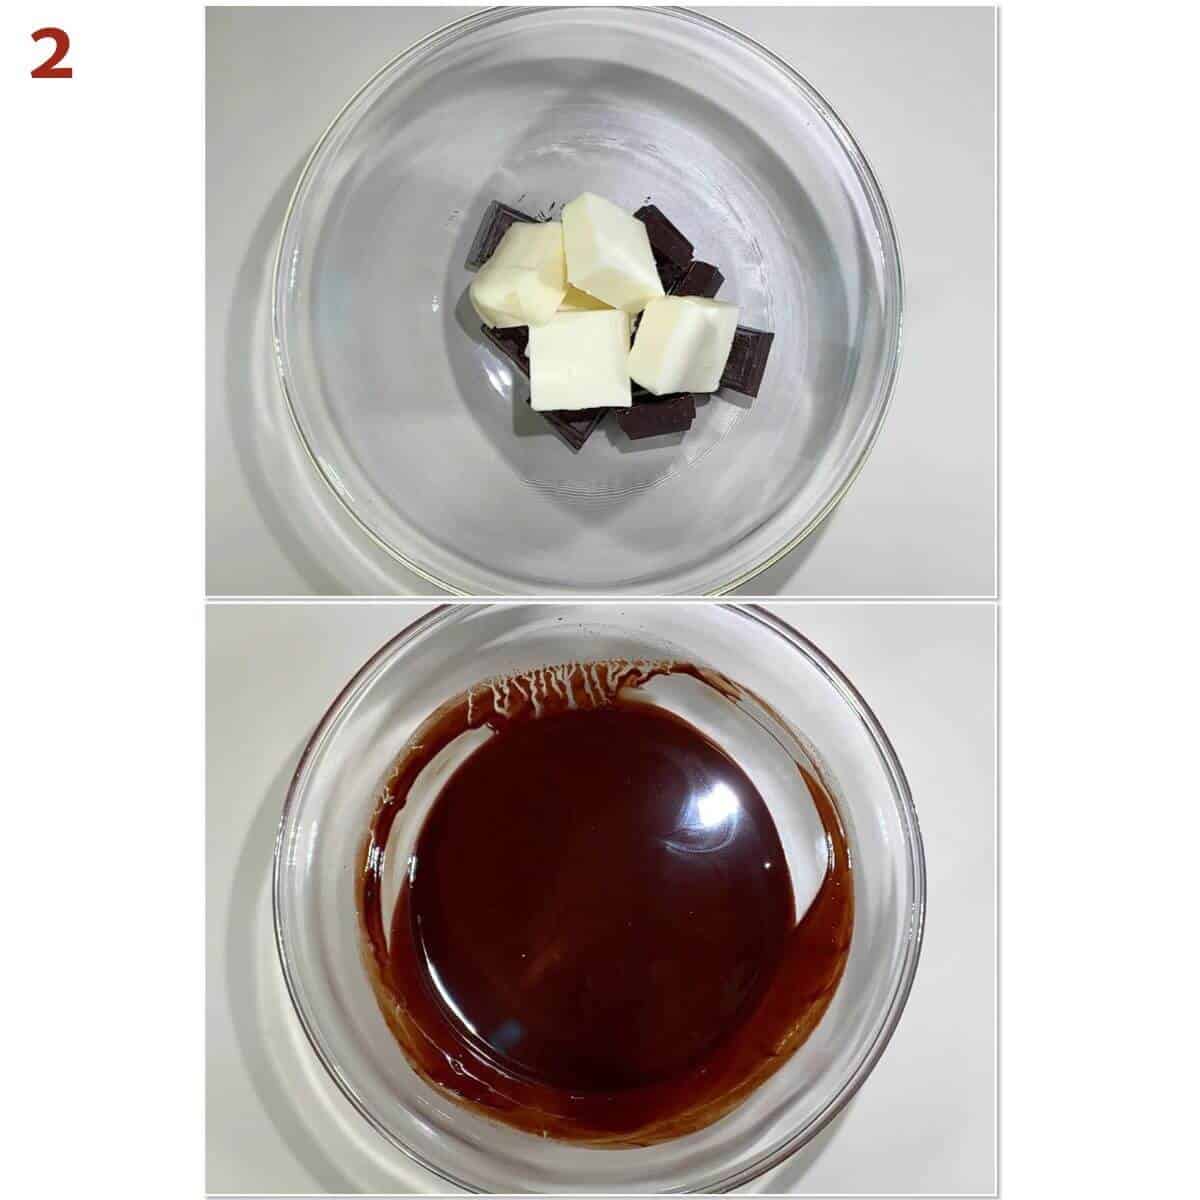 Collage of before and after melting chocolate and butter.